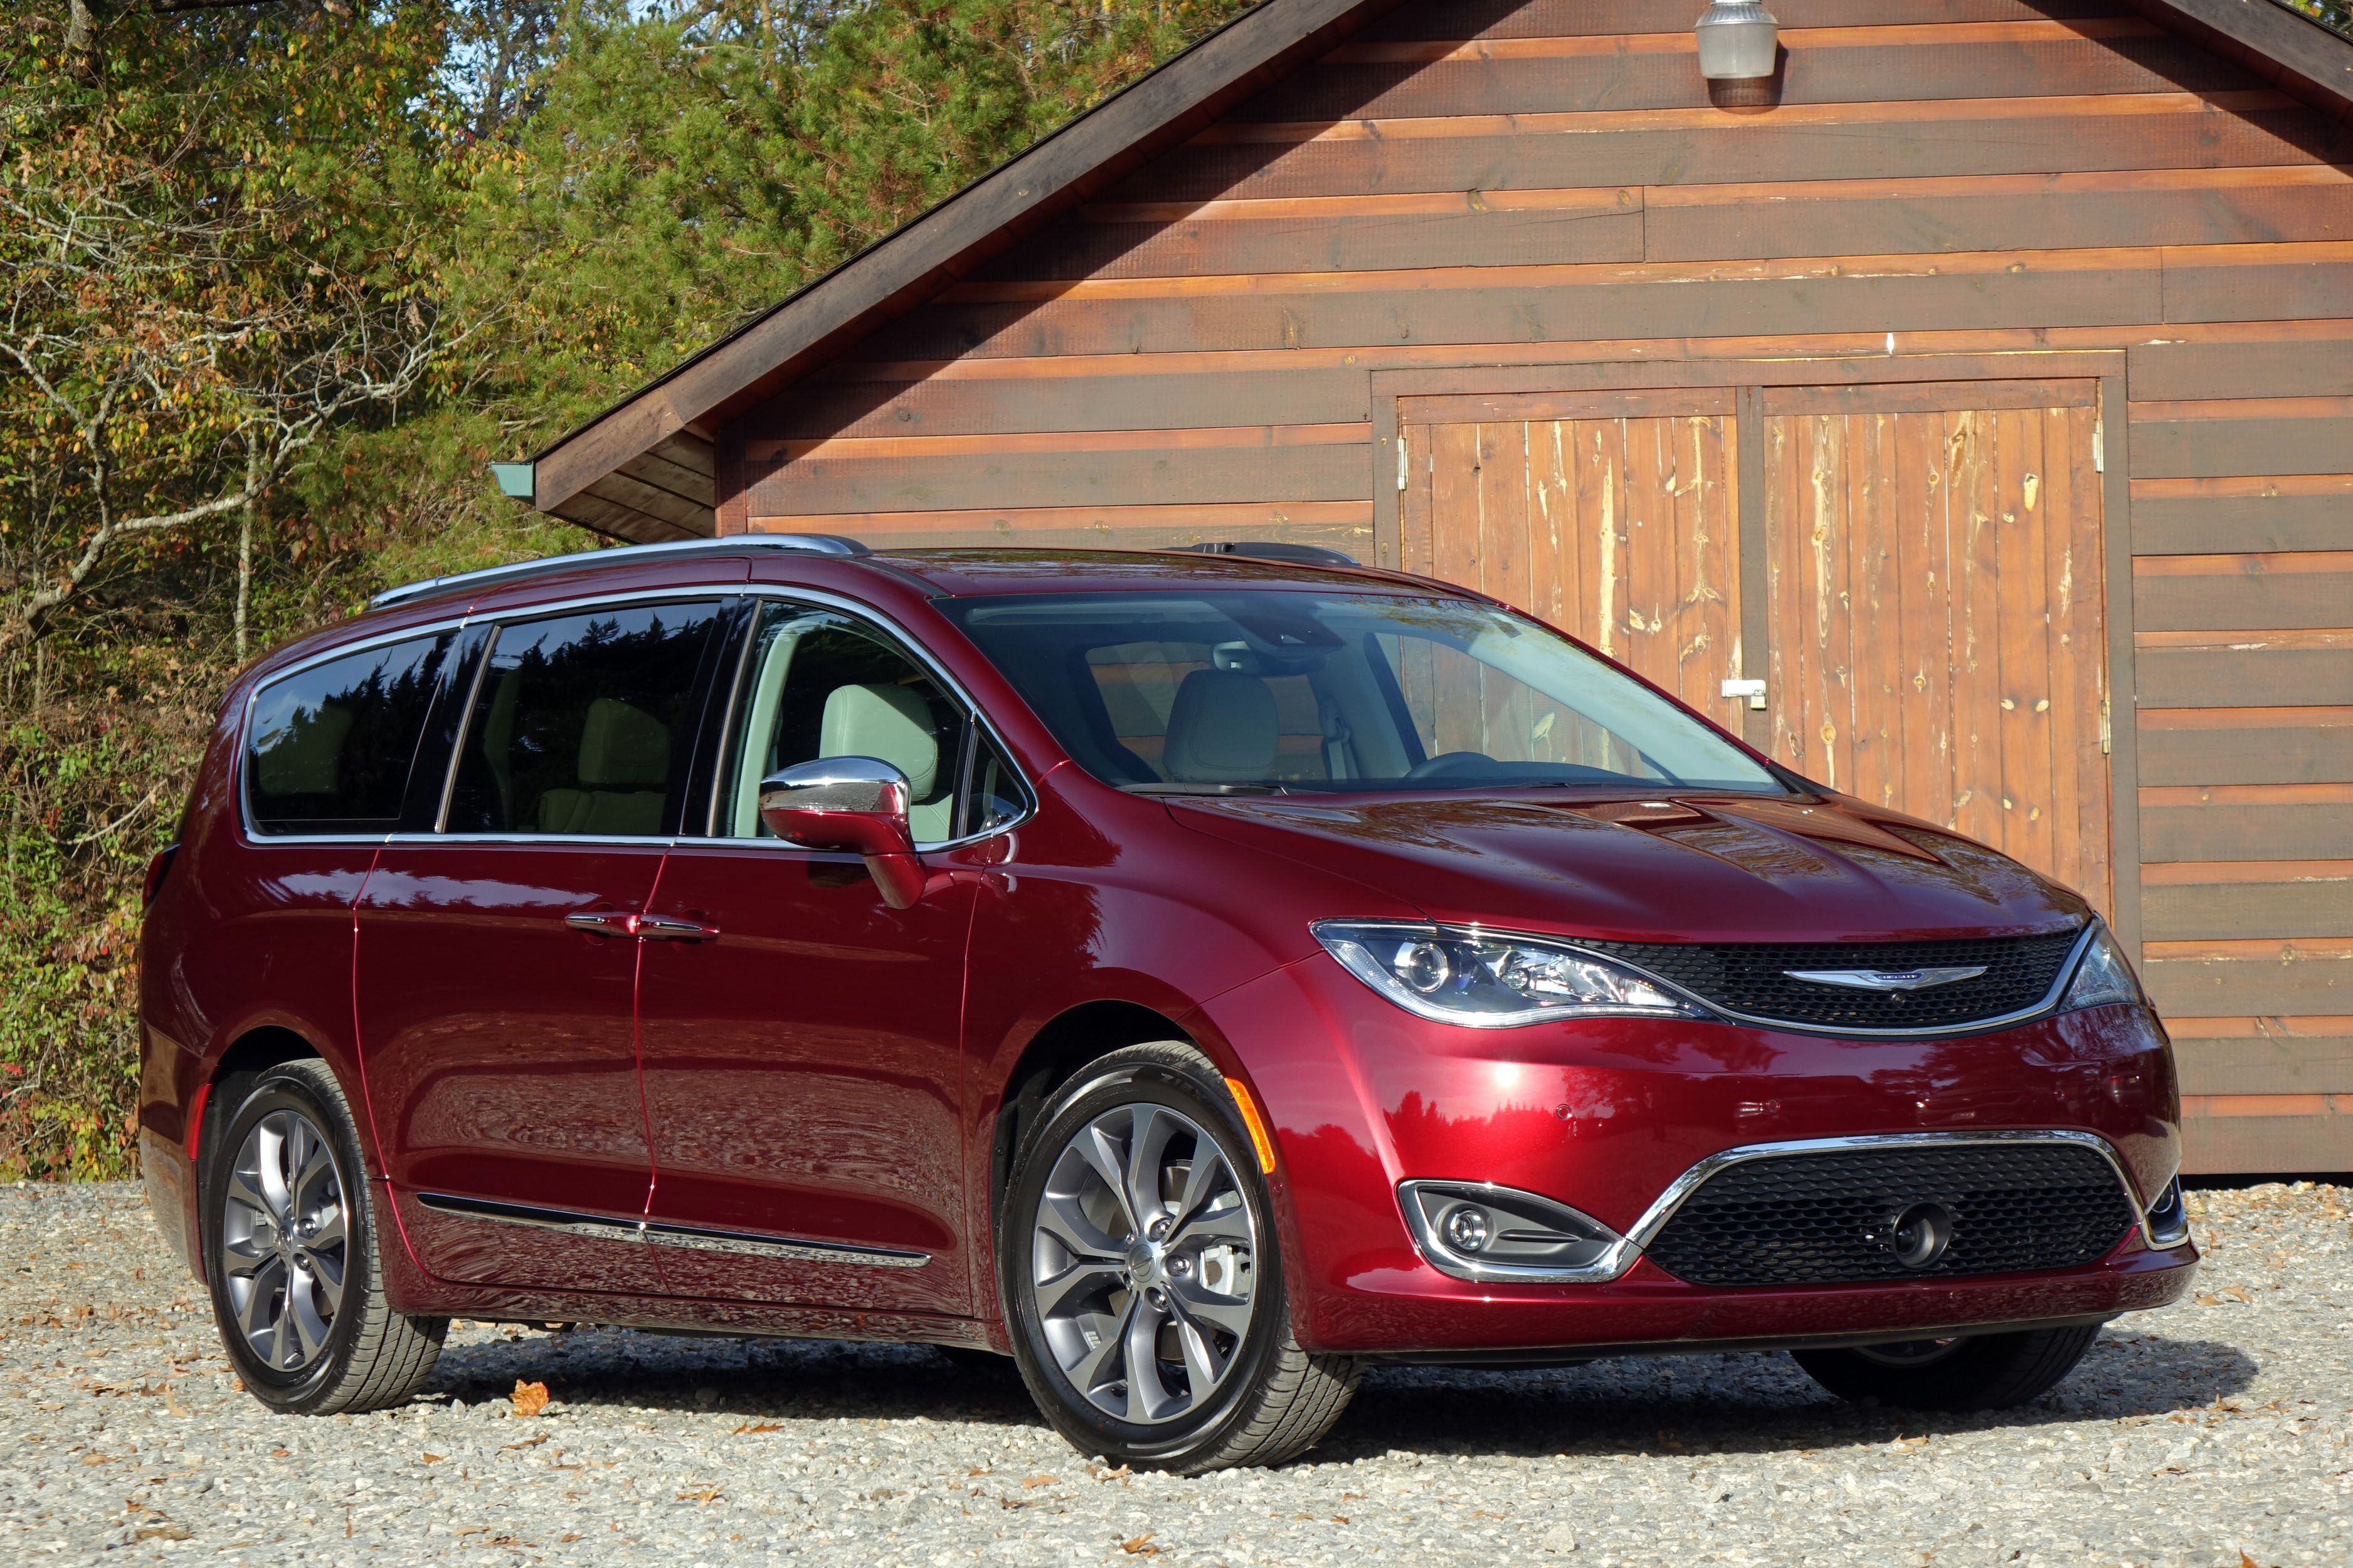 Chrysler Pacifica The Car Connection's Best Family Car to